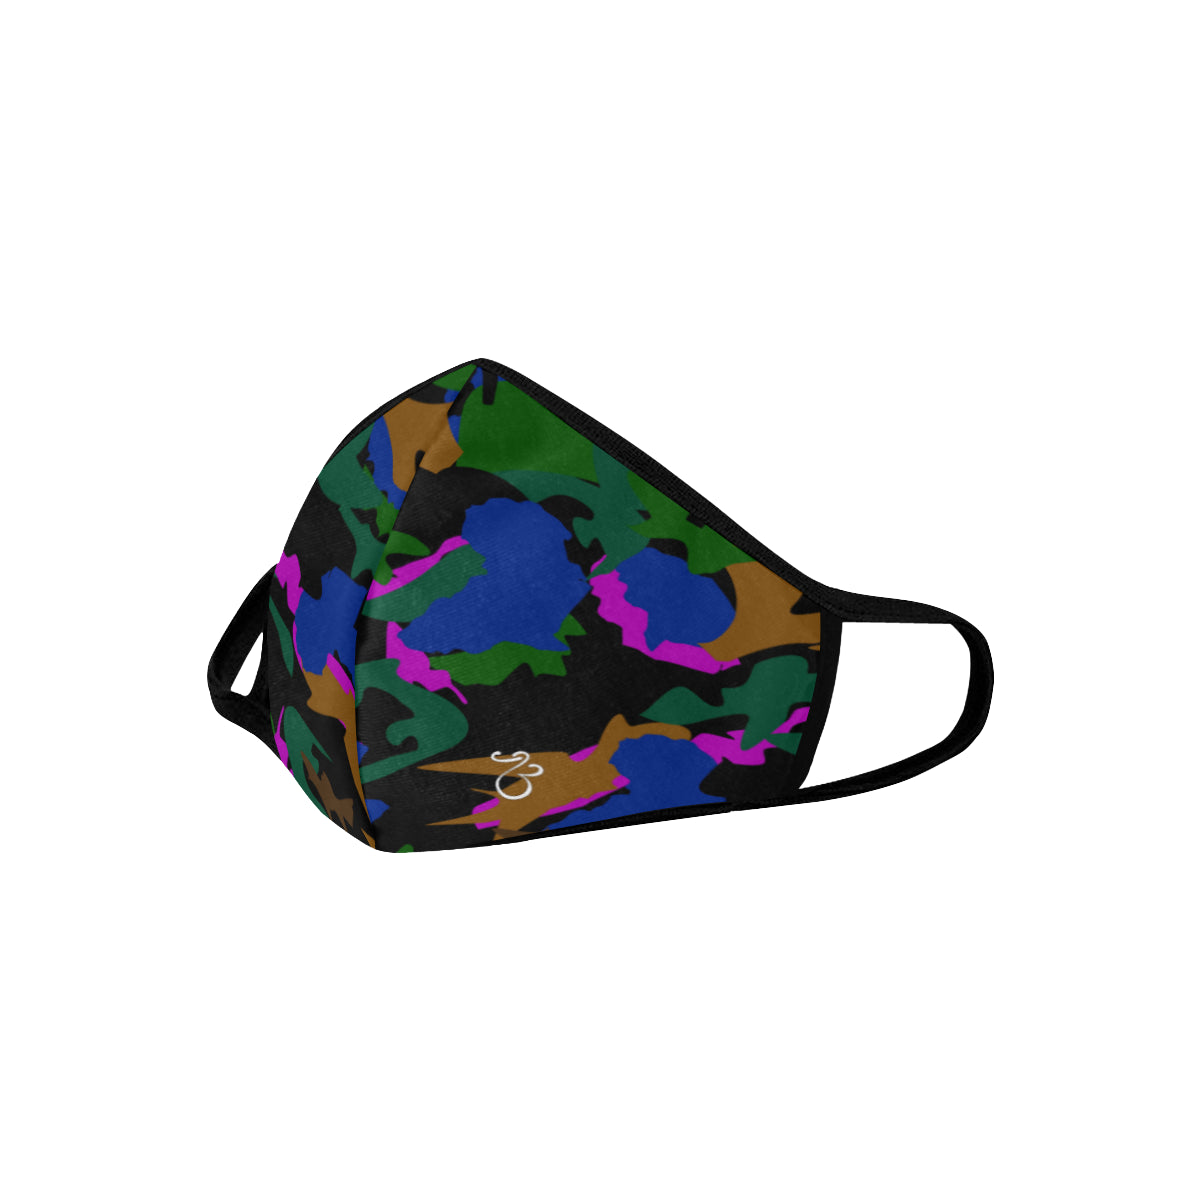 AfriBix Leaf Camo Print Cotton Fabric Face Mask with filter slot (30 Filters Included) - Non-medical use